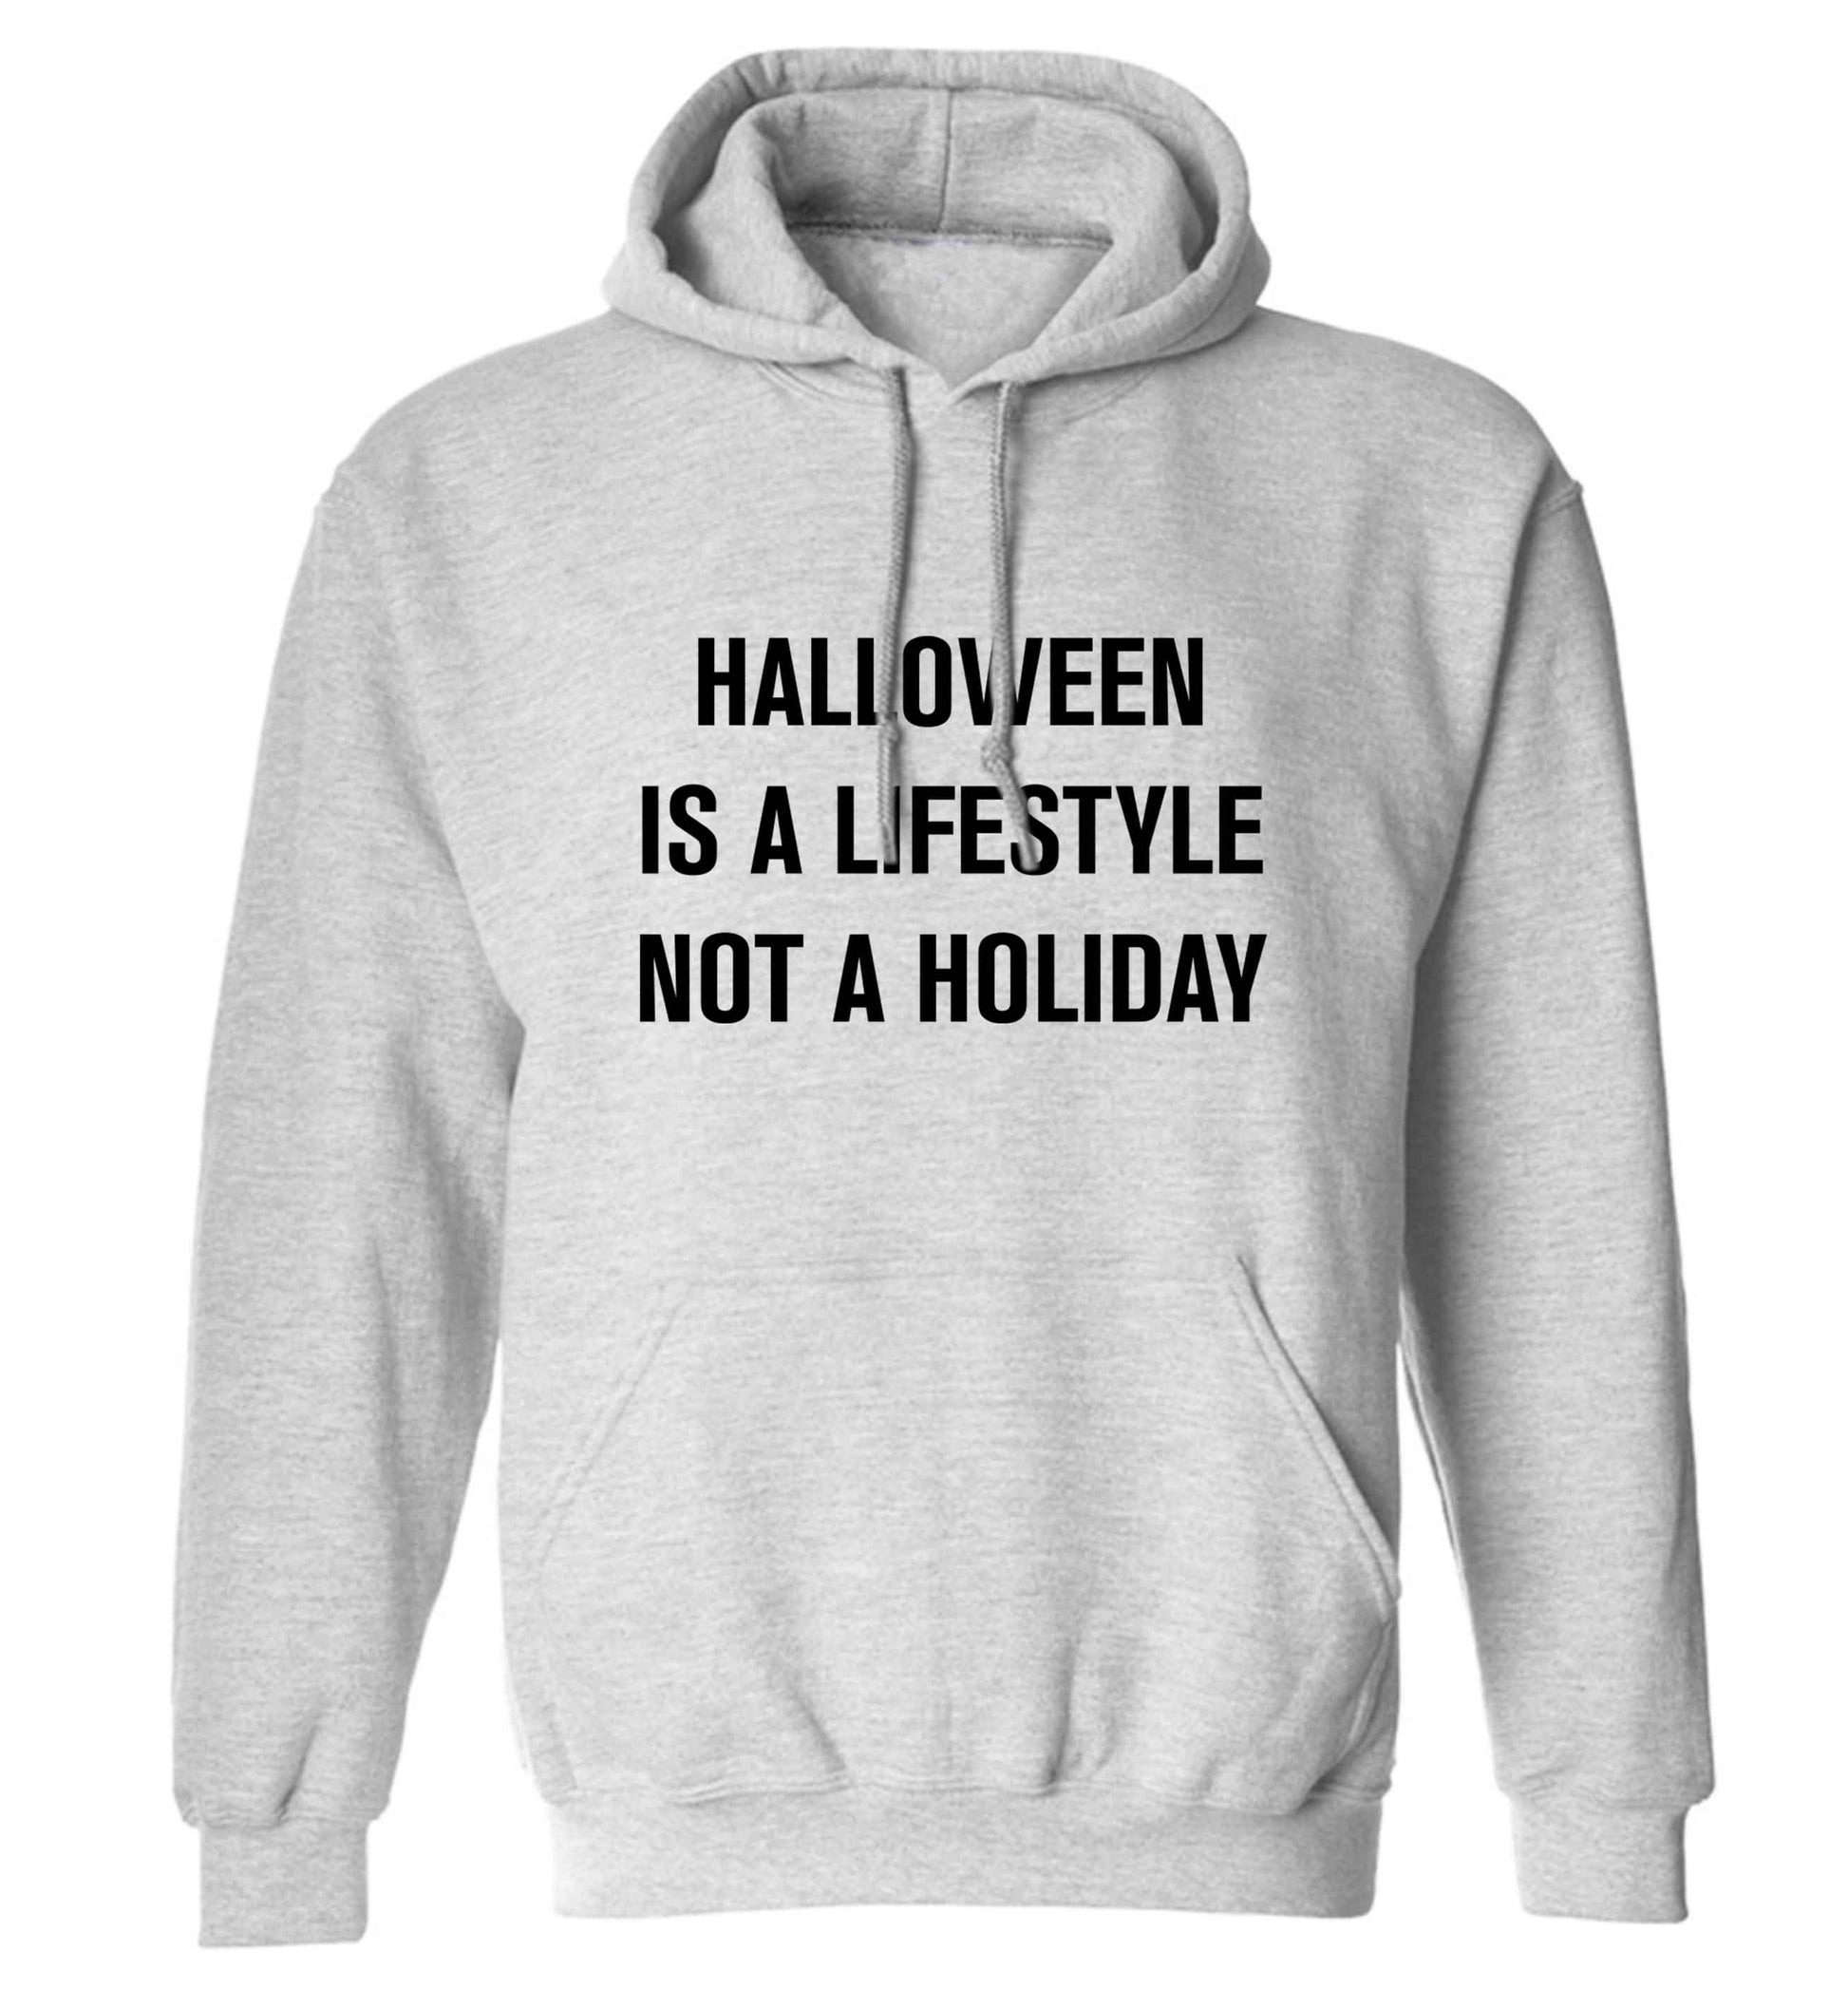 Halloween is a lifestyle not a holiday adults unisex grey hoodie 2XL